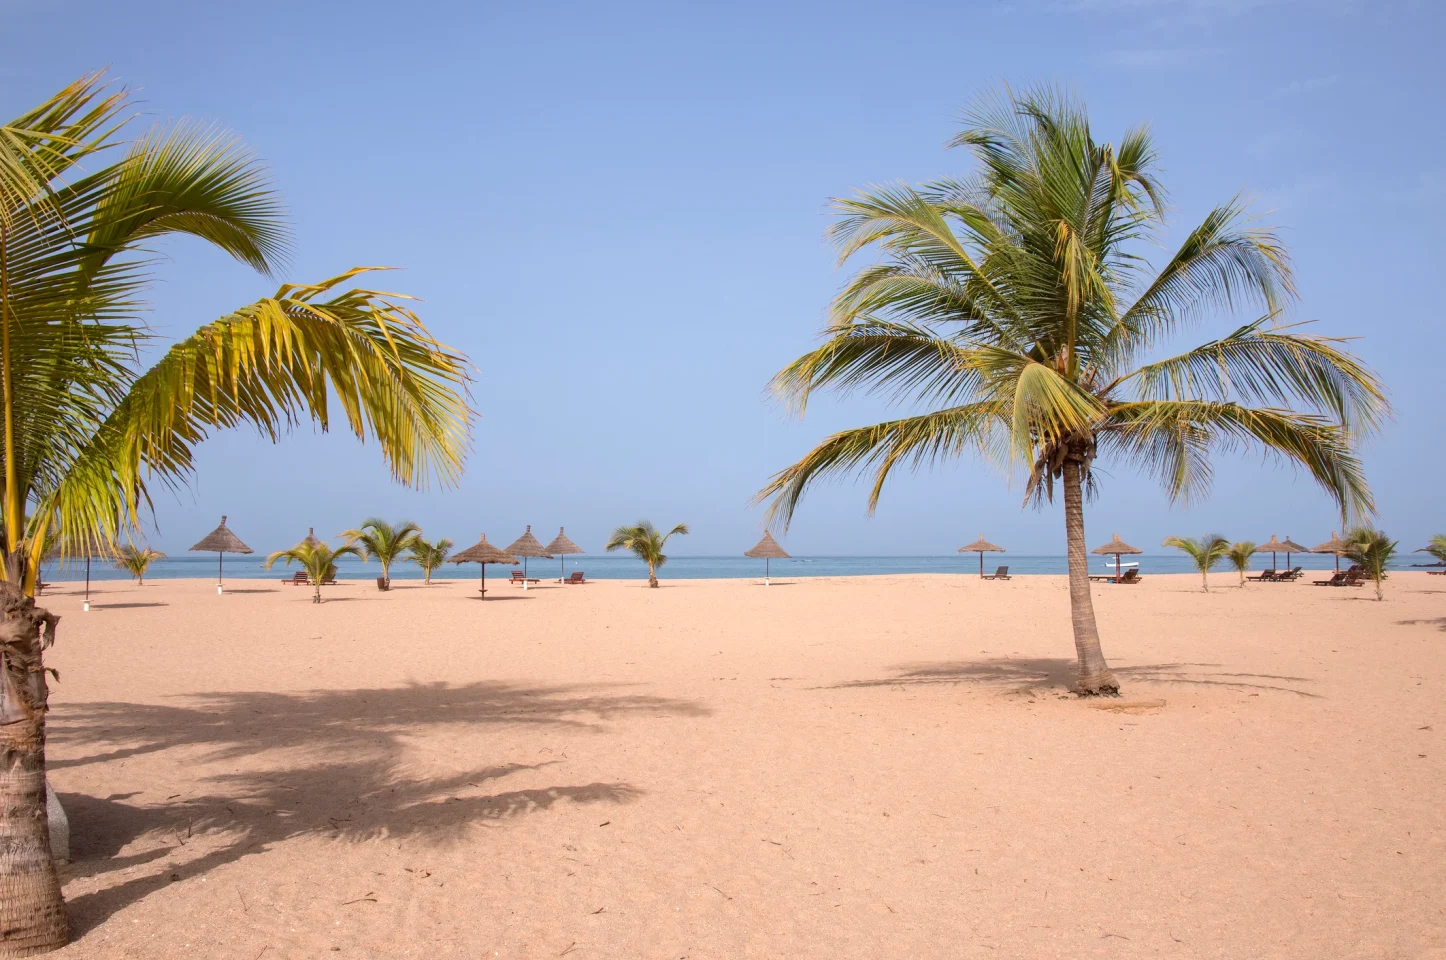 Landscape with palm trees on Saly beach on the Senegal coast.